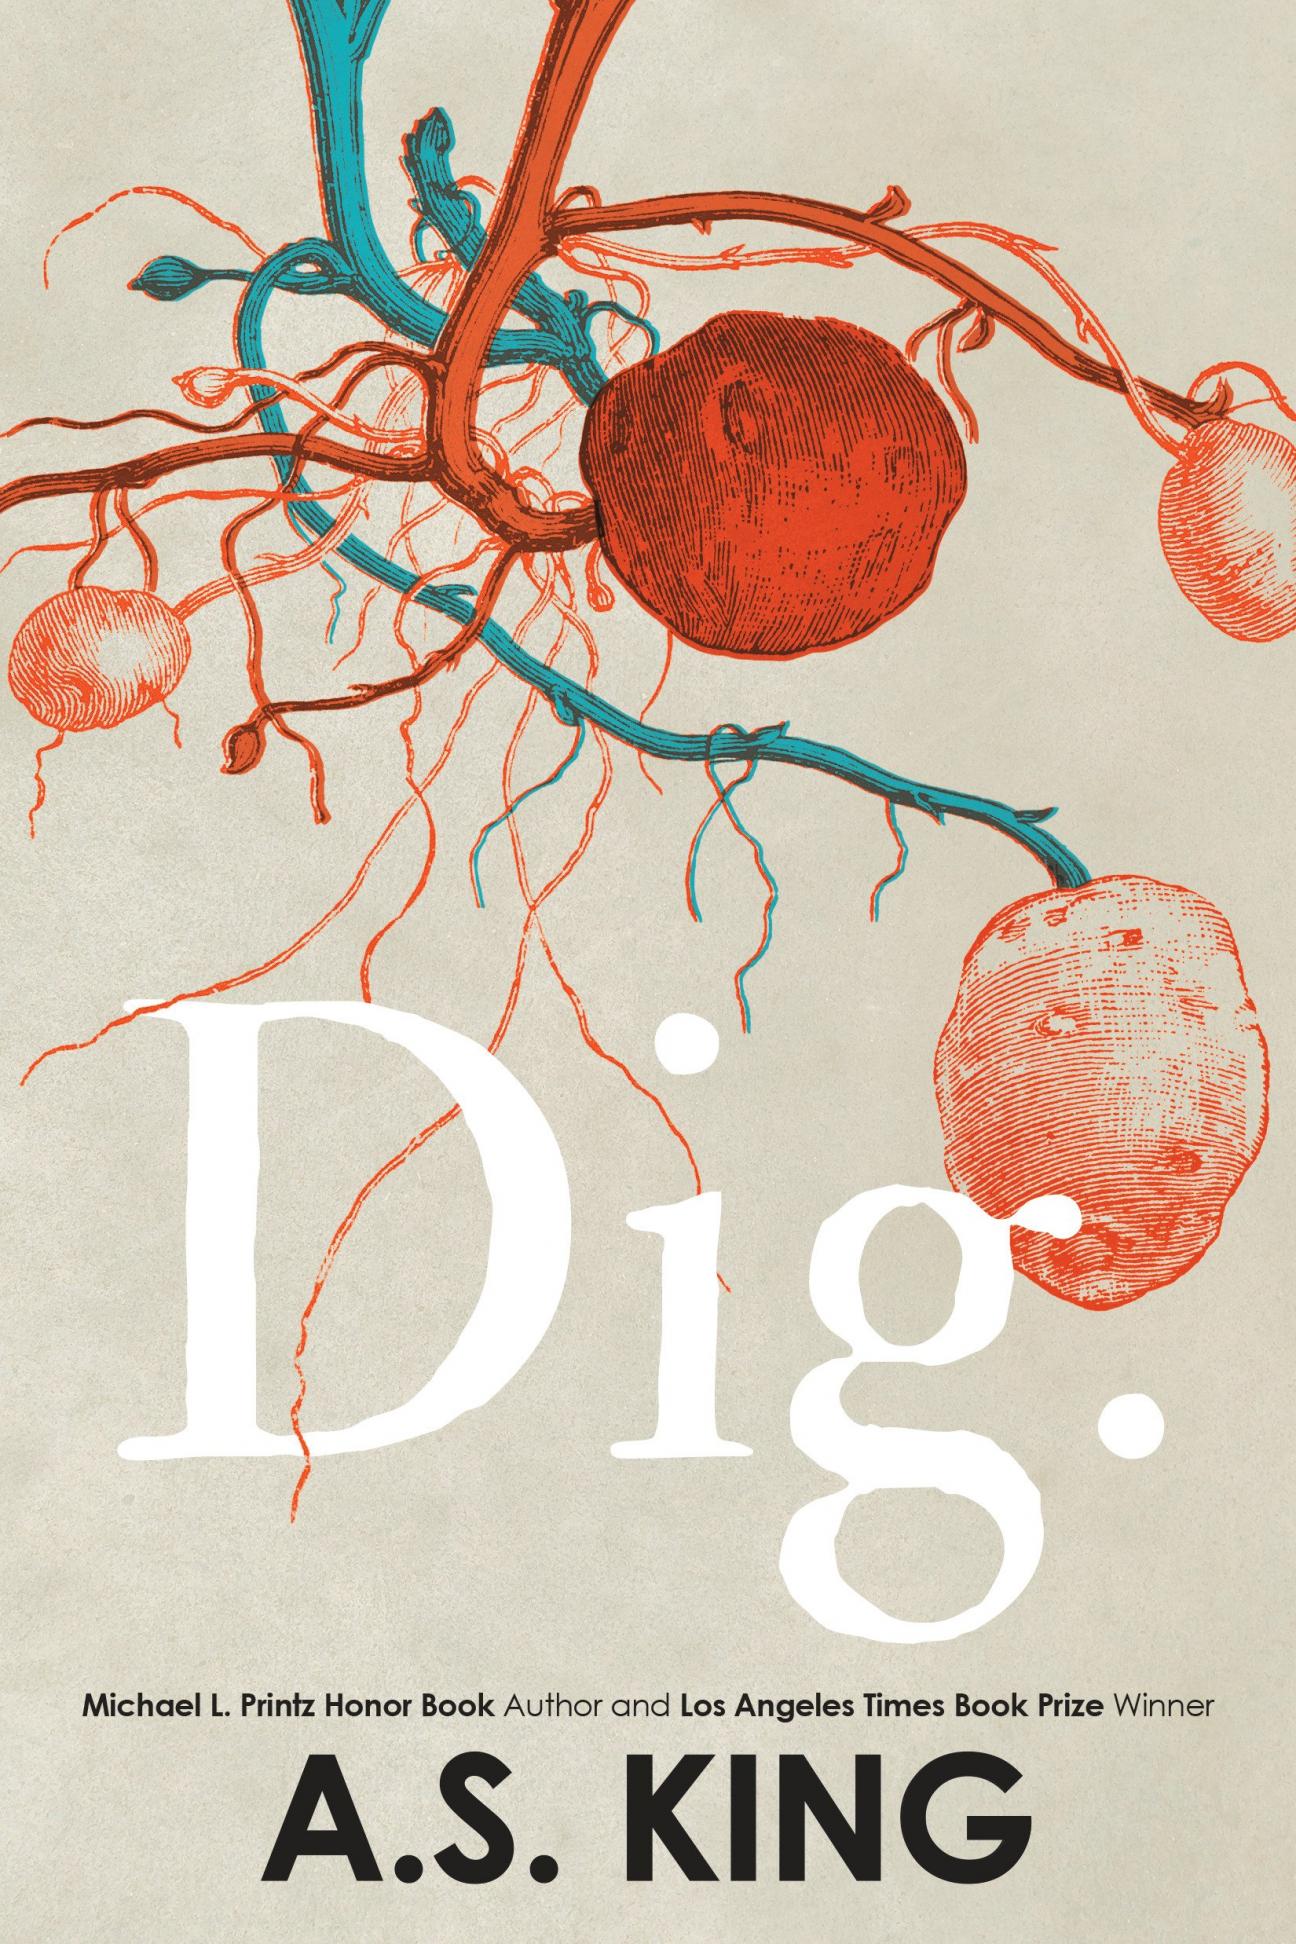 Illustration of veins and organs on a book cover.